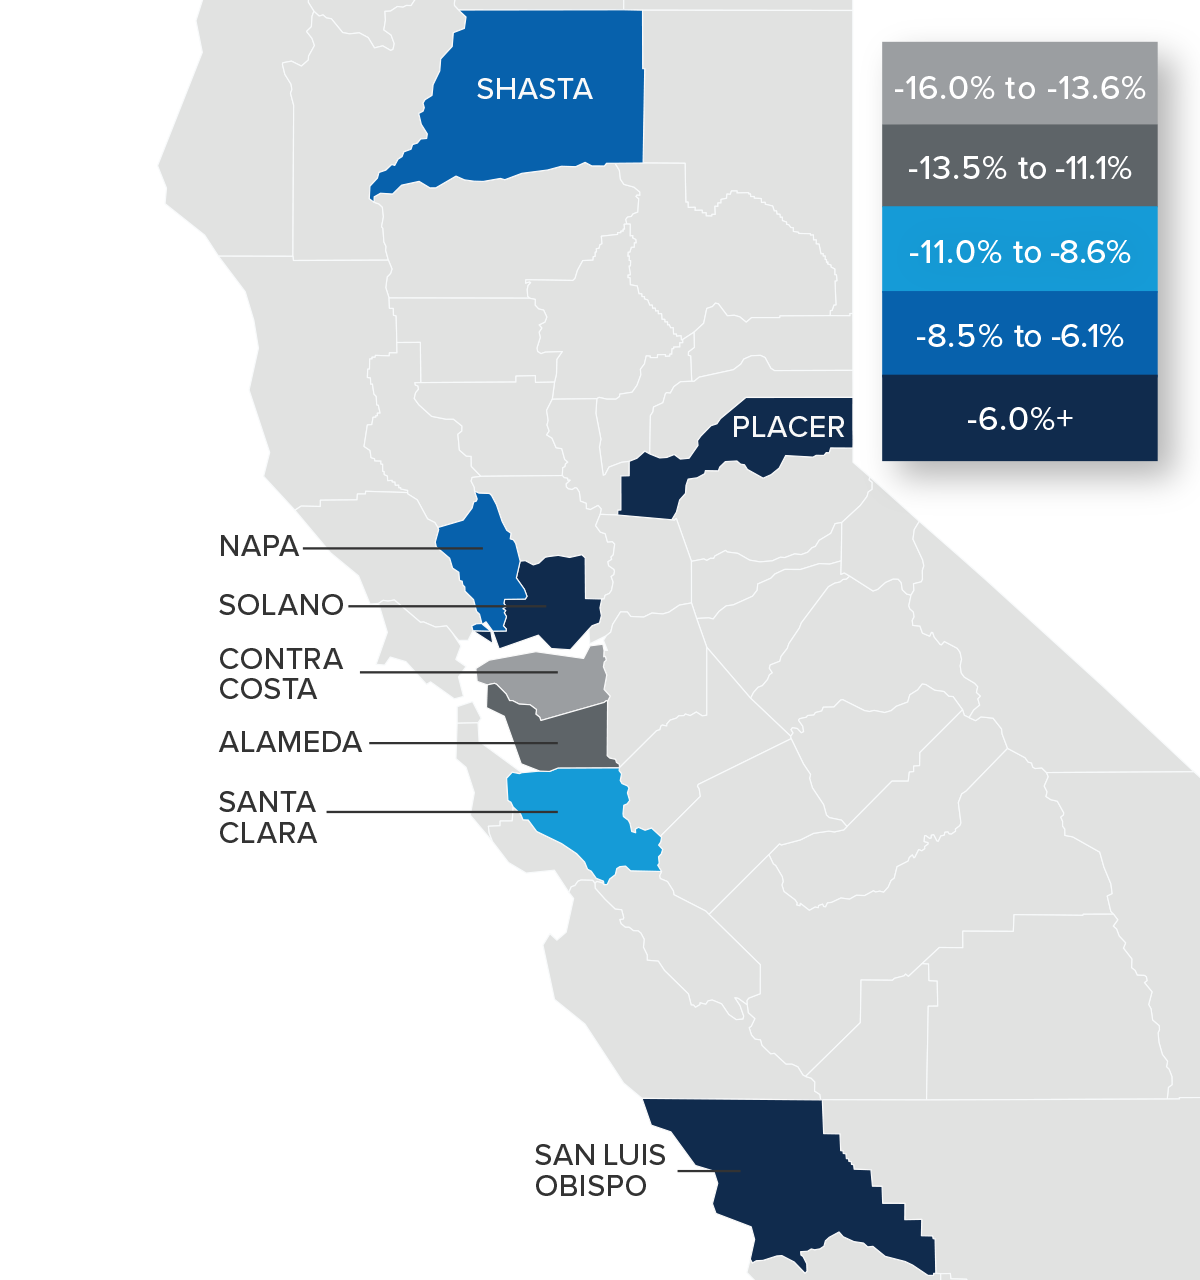 A map showing the real estate home prices percentage changes for various counties in Northern California. Different colors correspond to different tiers of percentage change. Contra Costa has a percentage change in the -16% to -13.6% range, Alameda is in the -13.5% to -11.1% change range, Santa Clara is in the -11% to -8.6% change range, Shasta and Napa are in the -8.5% to -6.1% change range, and Placer, Solano, and San Luis Obispo are in the -6%+ change range.